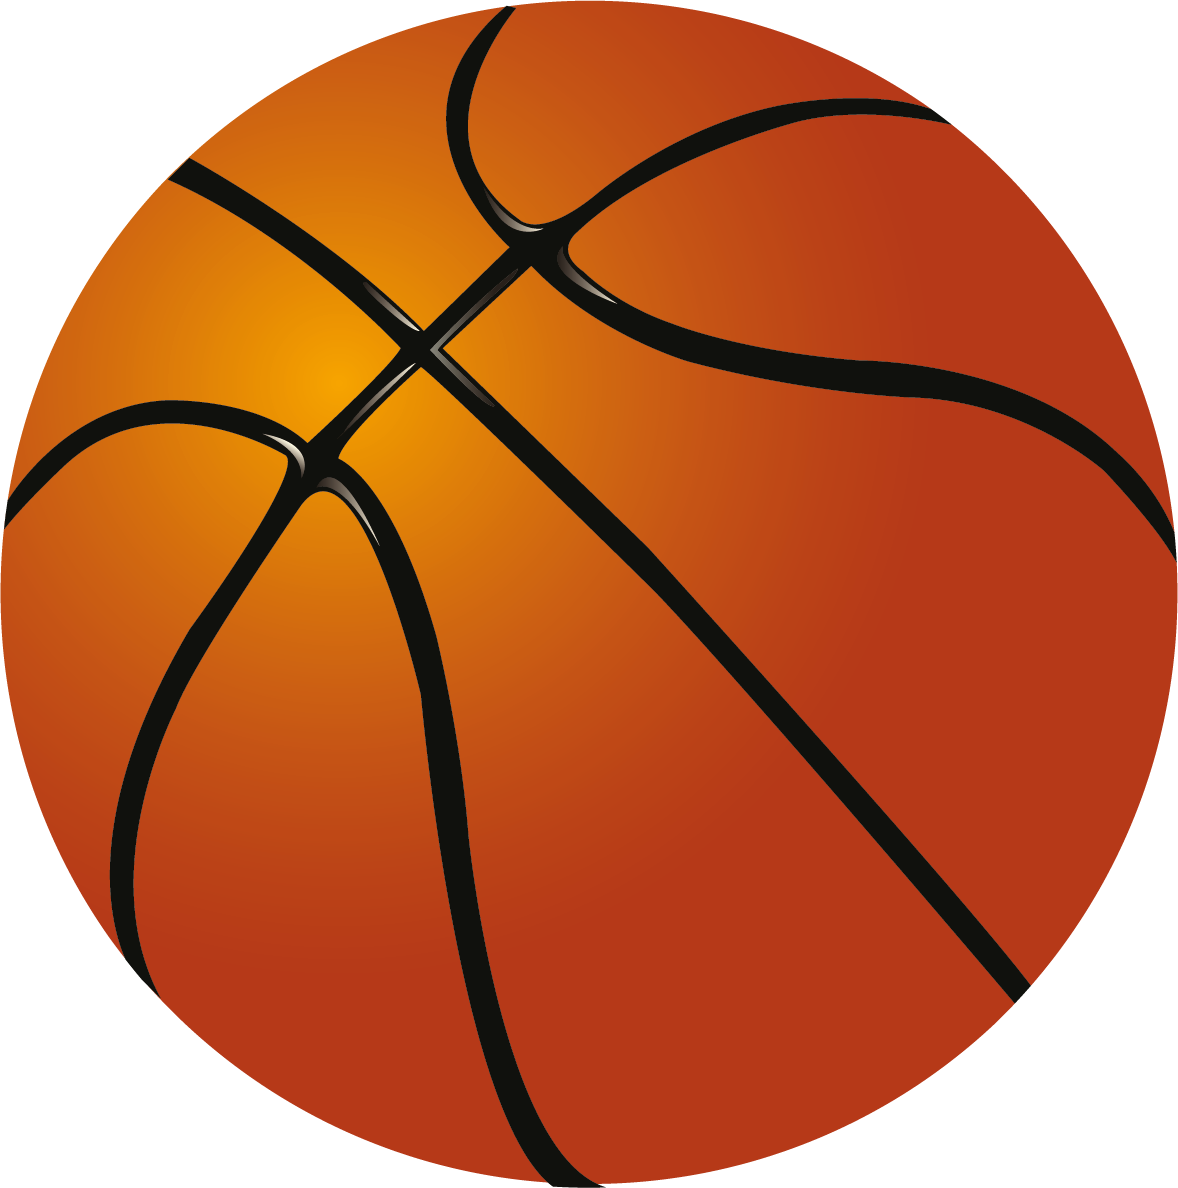 Basketball Ball Clipart Black And White   Clipart Panda   Free Clipart